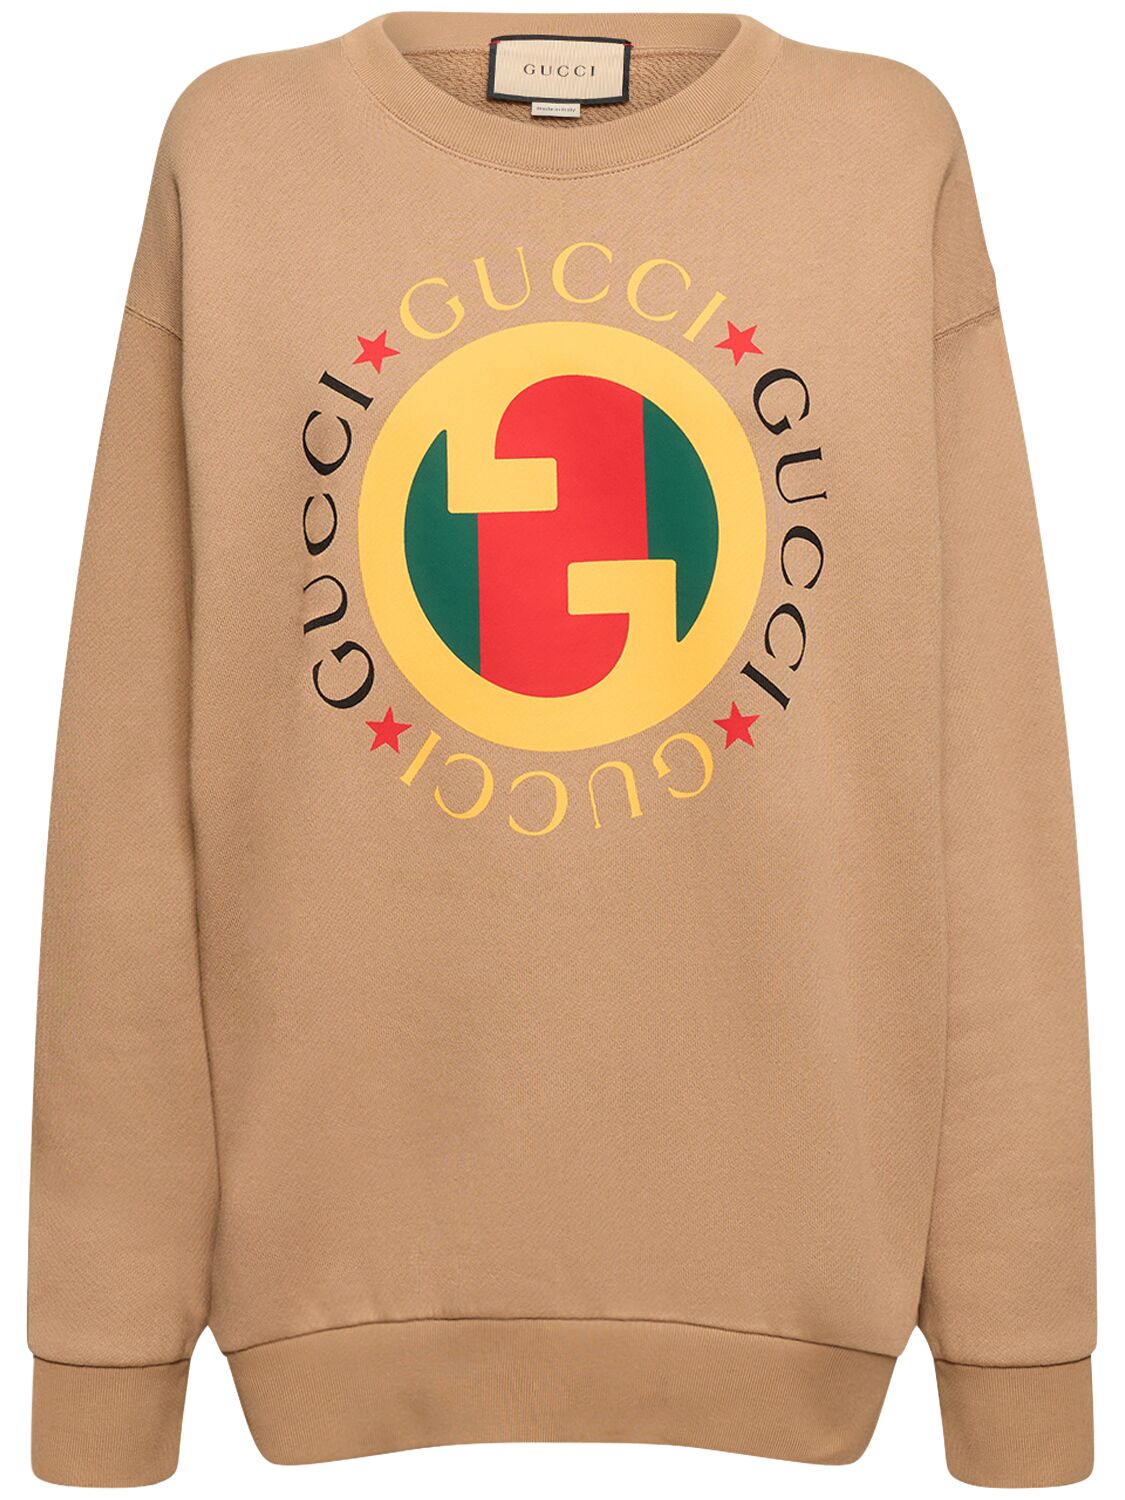 Shop GUCCI 2023 SS Pullovers Long Sleeves Plain Cotton Logo Luxury Hoodies  (700120_XJEXD_9095, 700120, 700120XJEXD9095, 700120 XJEXD 9095) by FORYOU31